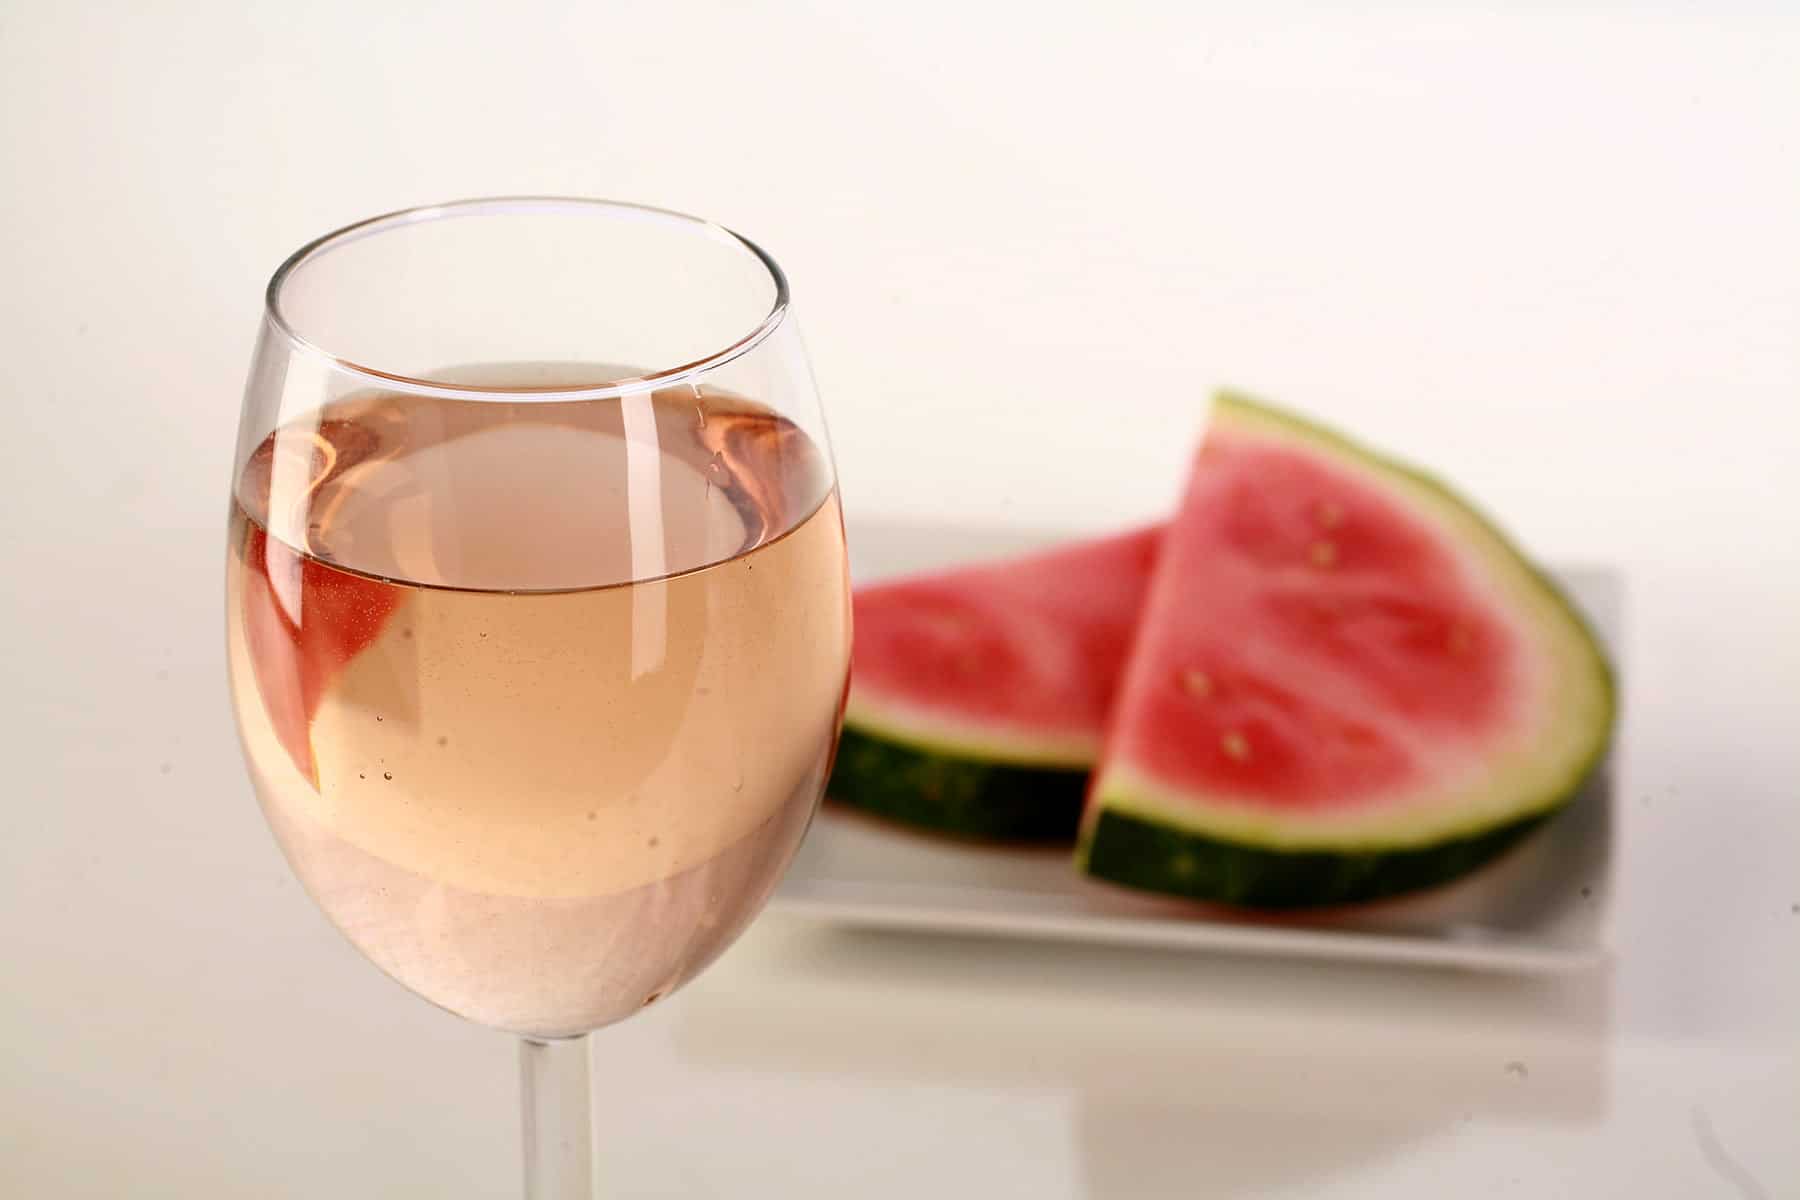 A glass of pale pink wine, next to a white plate with watermelon slices on it.